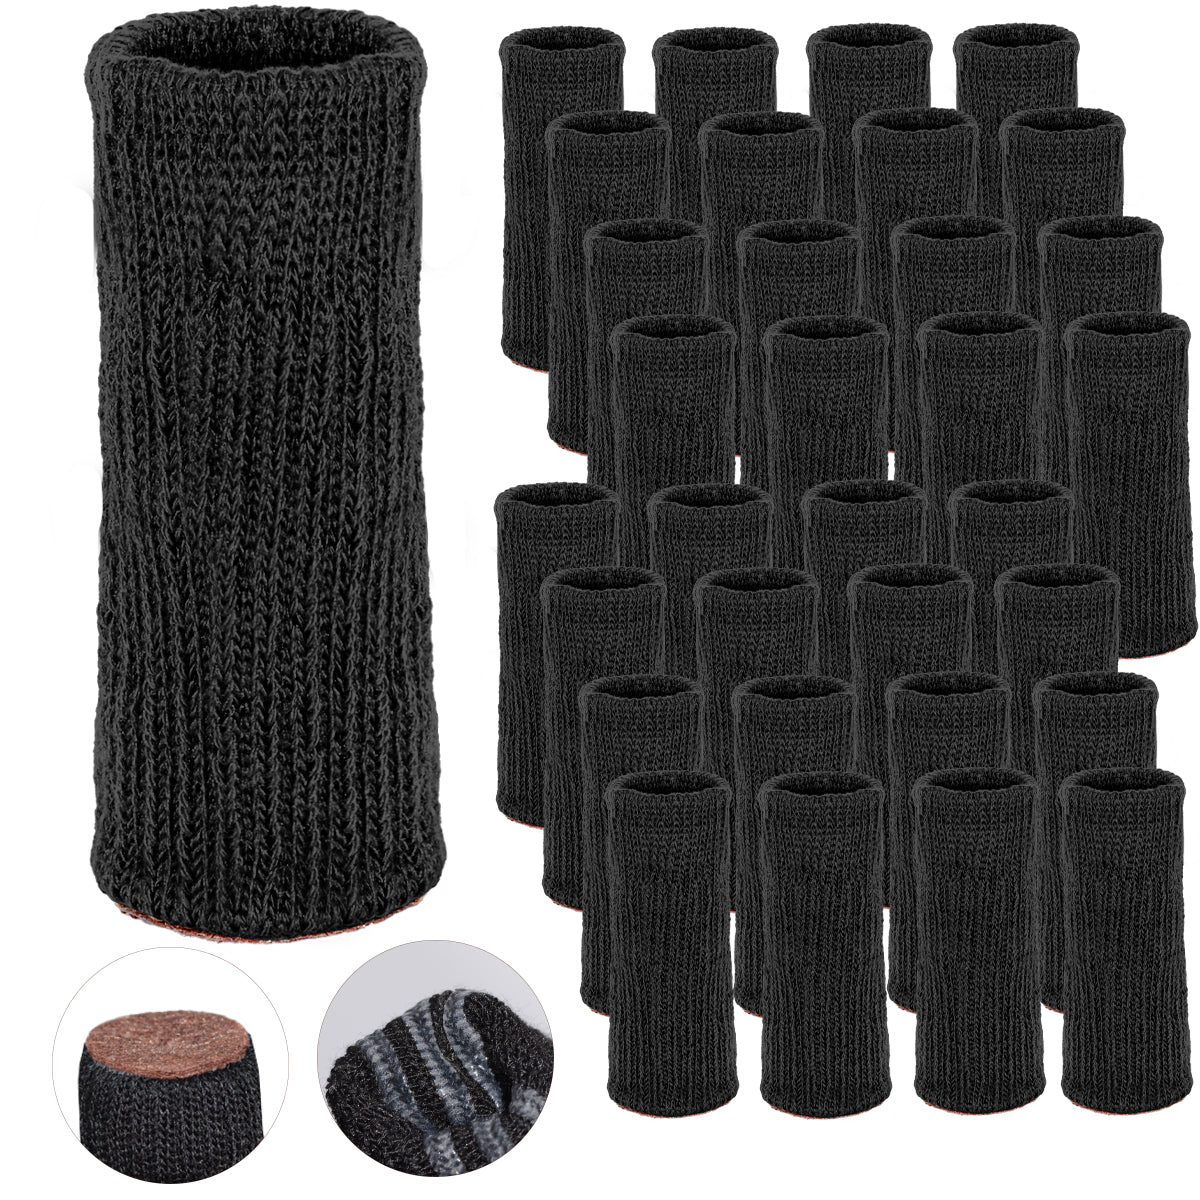 
                  
                    Morvat Black/Brown Furniture Leg Socks for Table, Chairs, & Furniture, Small/Large, 32 Pack
                  
                